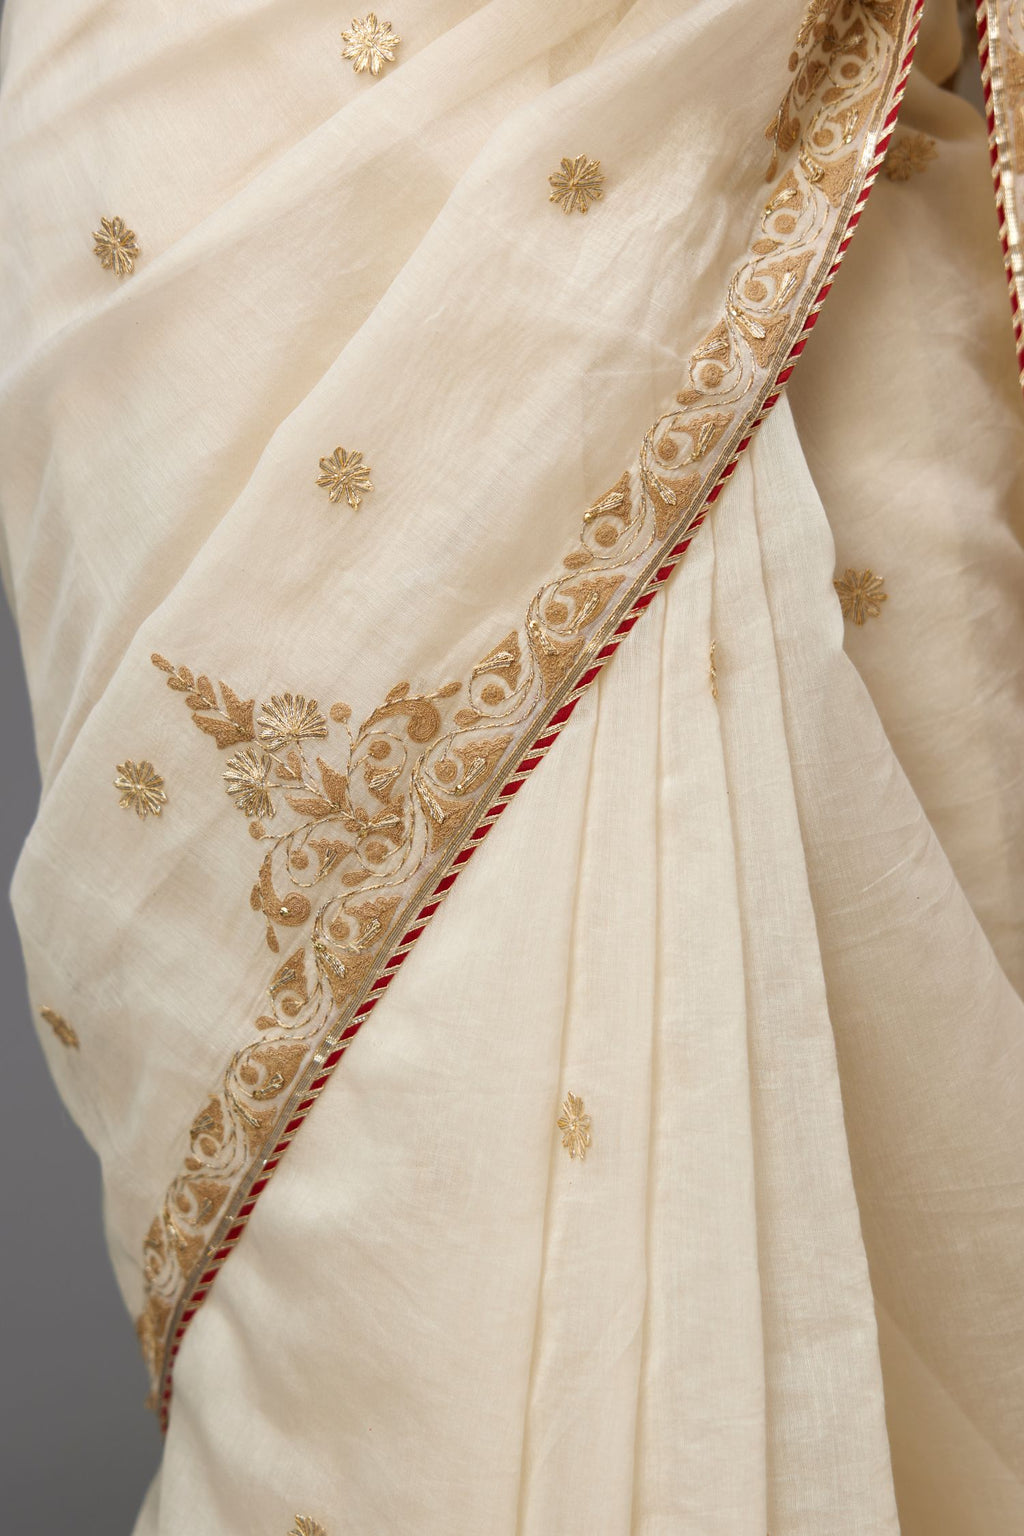 Off-white cotton chanderi saree set with all-over dori and gota embroidery, highlighted with gold sequins, paired with silk chanderi hand block printed choli with all-over gota detailing.